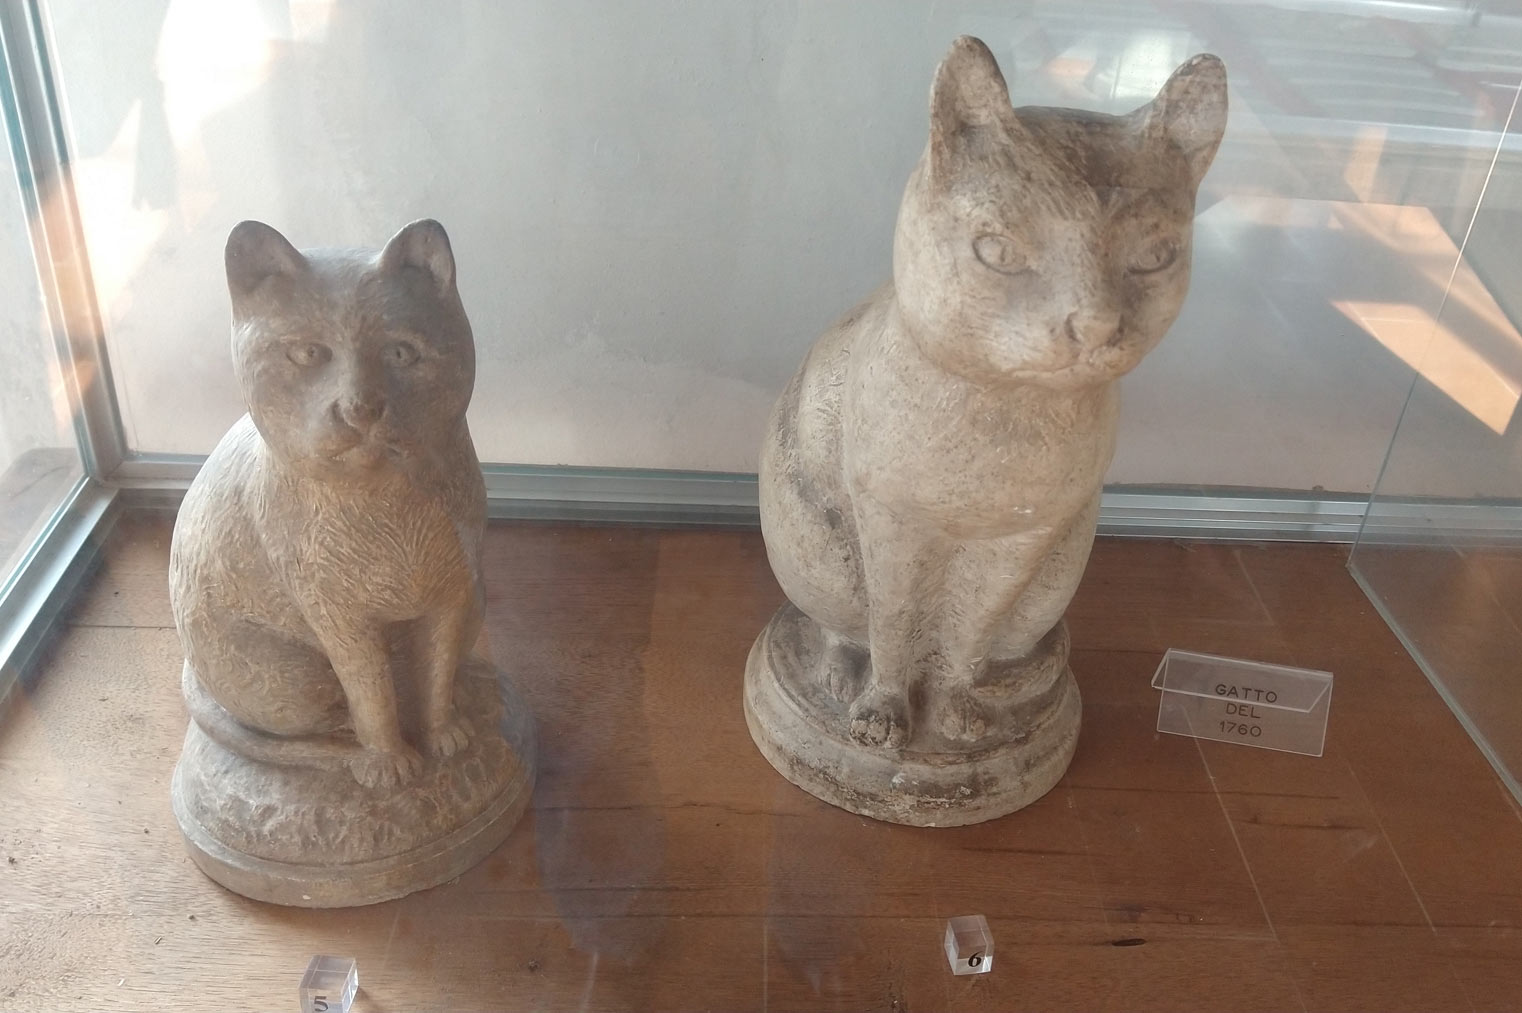 The two plaster cats blackened with candle smoke (1760)